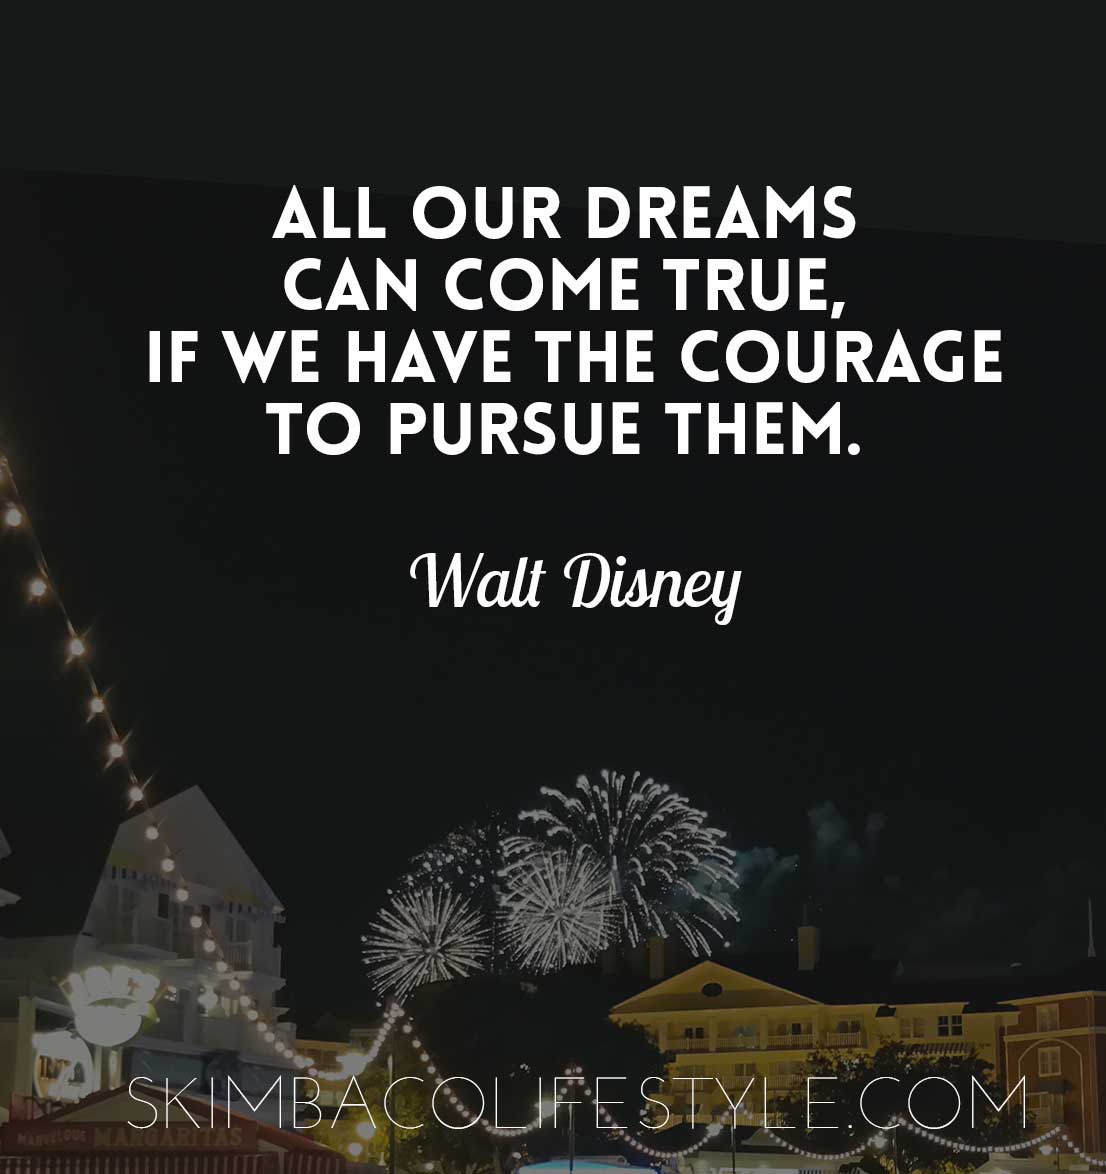 All our dreams can come true, if we have the courage to pursue them. Walt Disney. Via @skimbaco